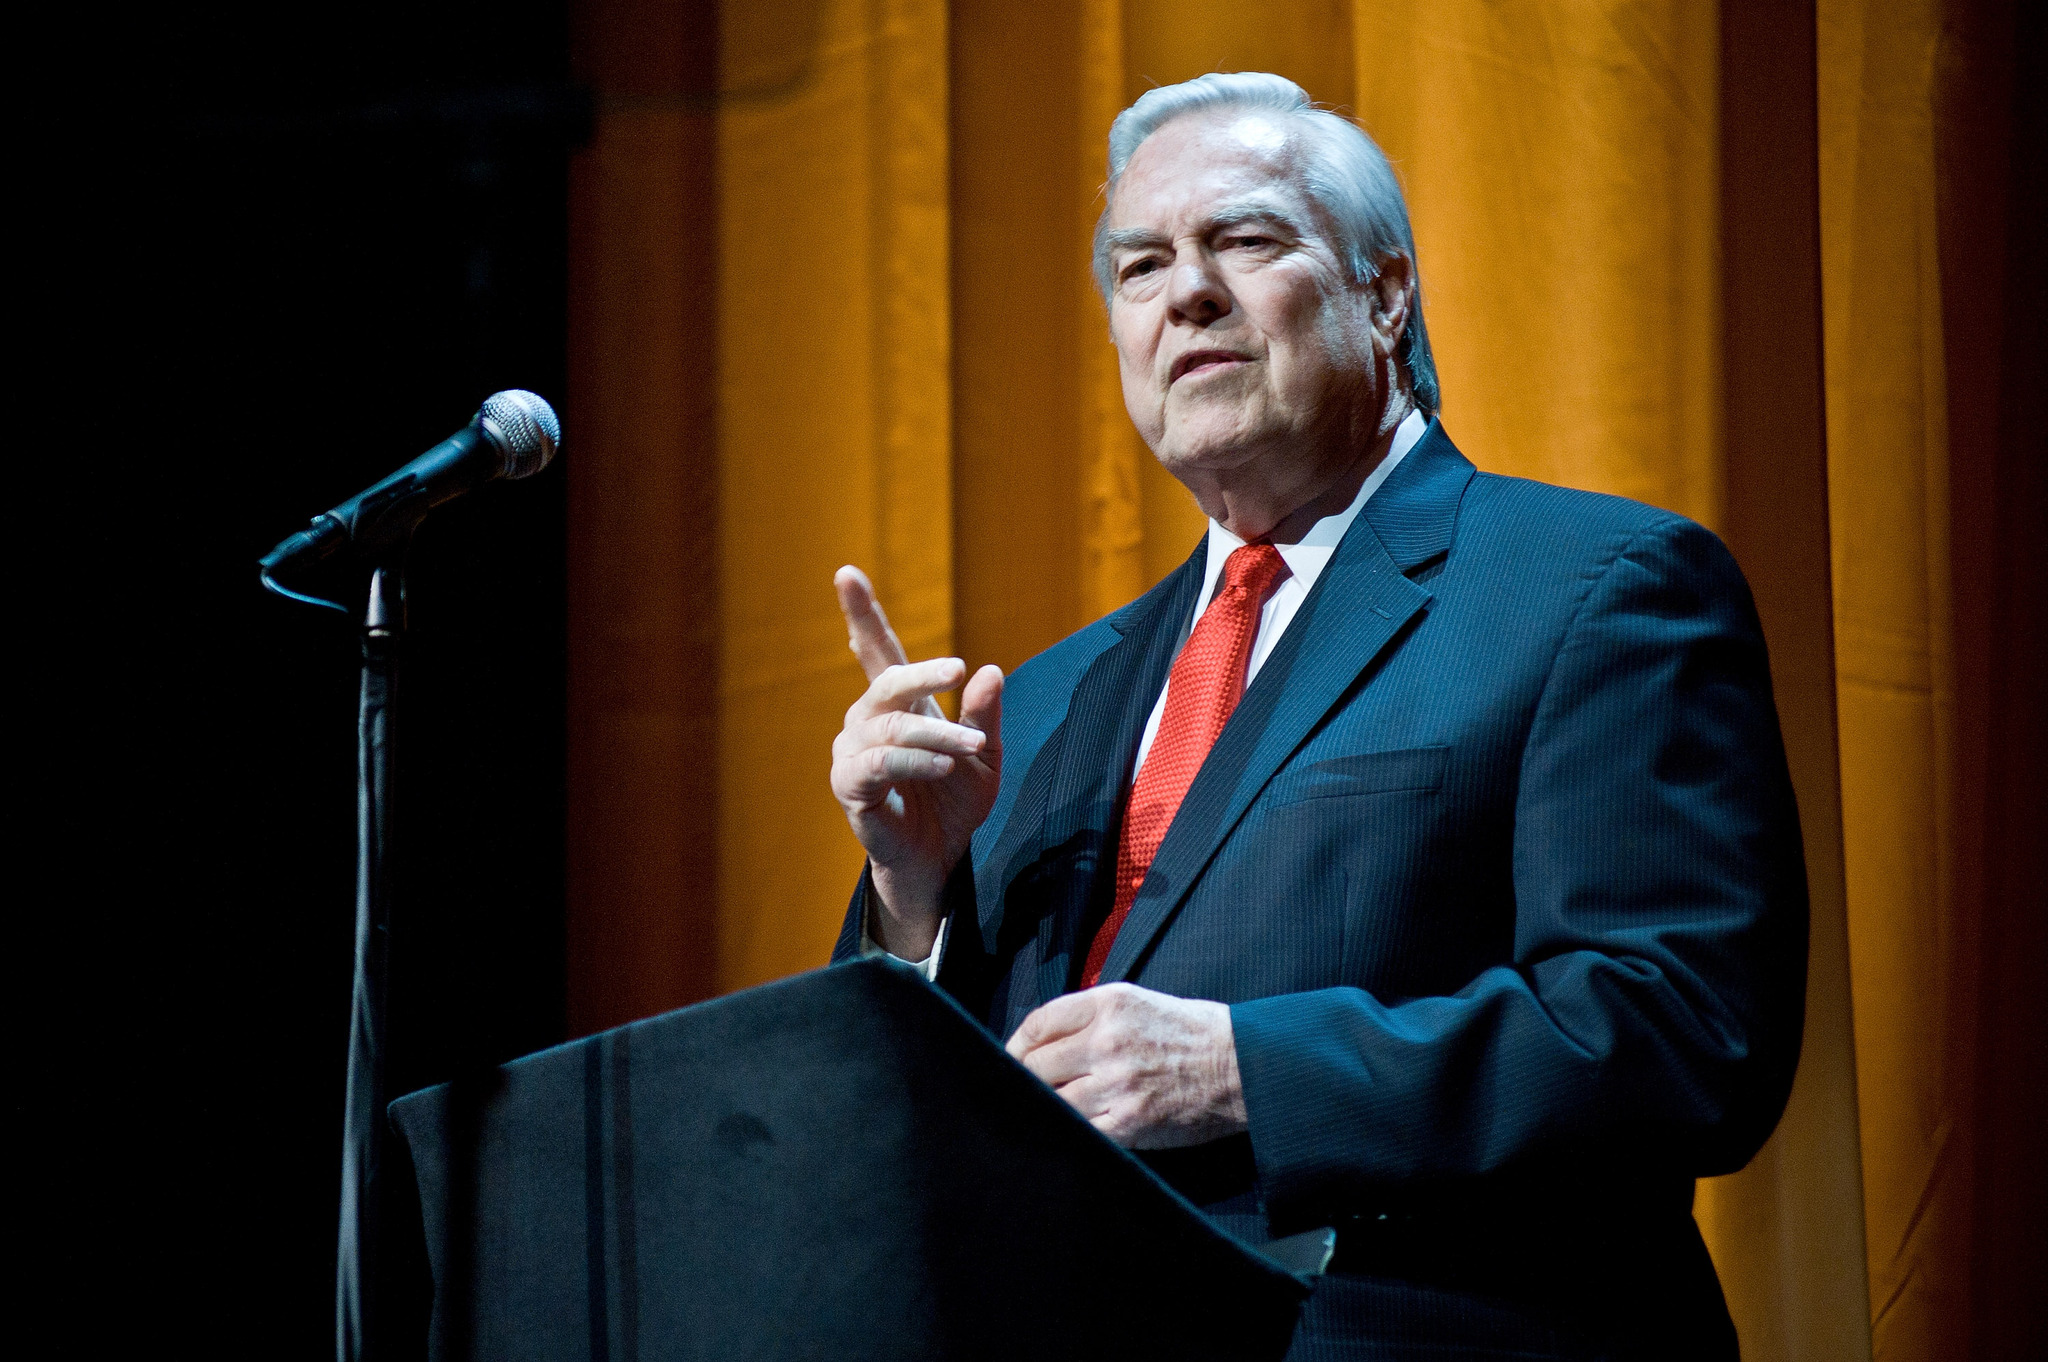 Bill Kurtis attends the Roger Ebert Memorial Tribute at Chicago Theatre on April 11, 2013 in Chicago, Illinois.